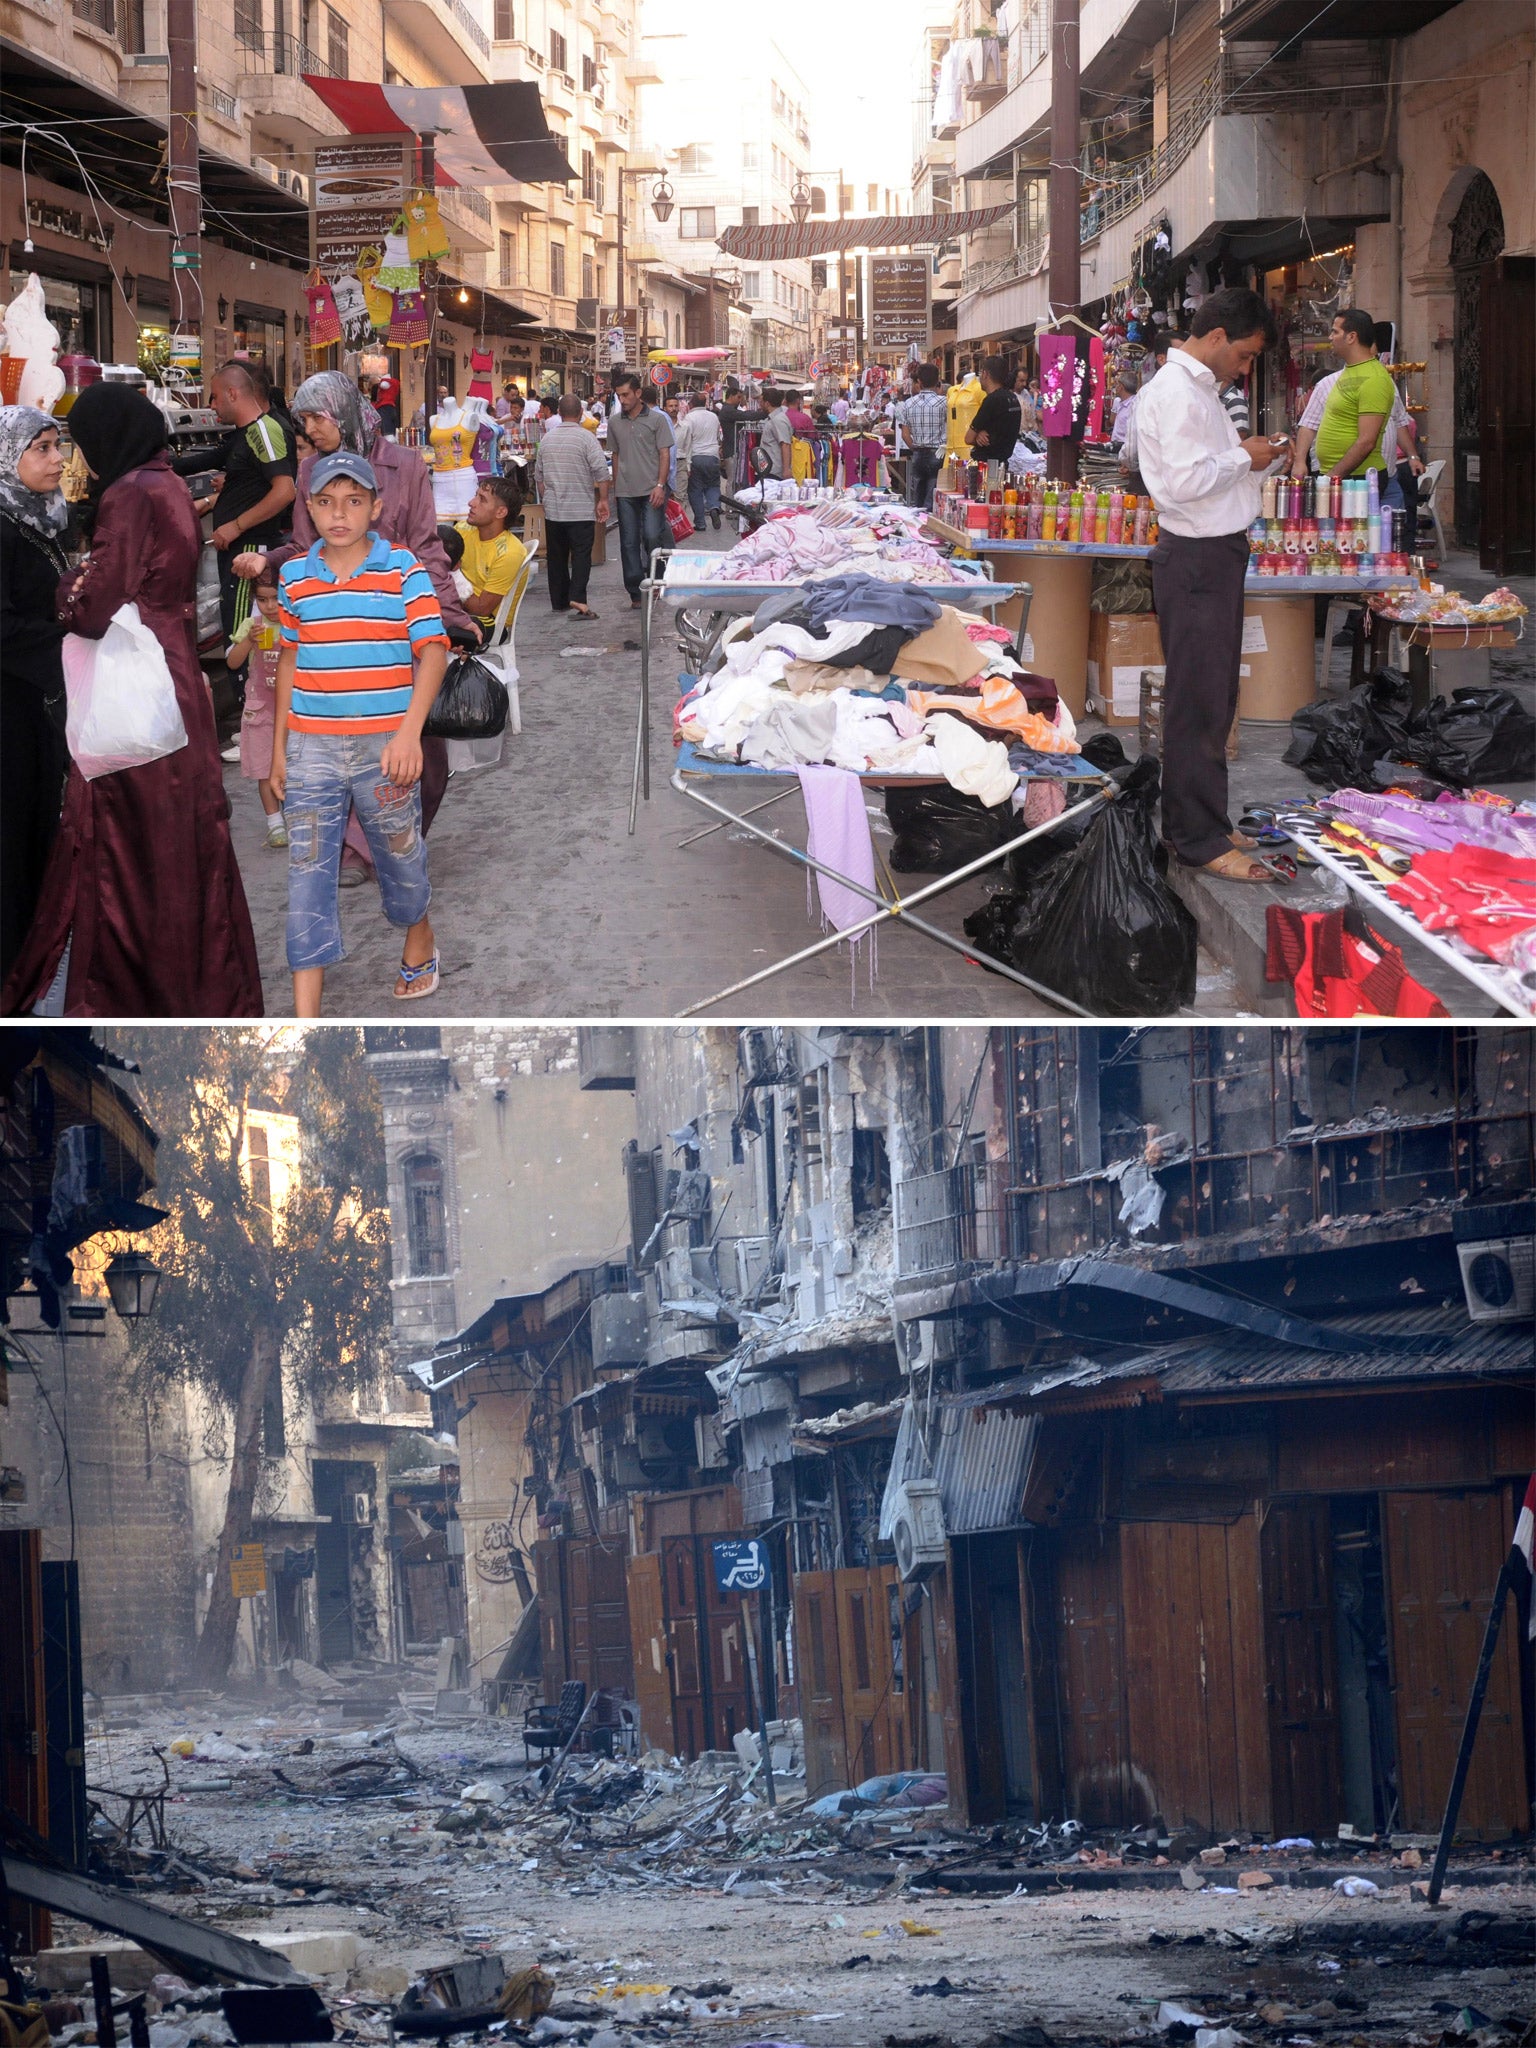 2011 - shops and stalls in the medieval souk area of Aleppo; 2013 - the old souk is now a scene of devastation